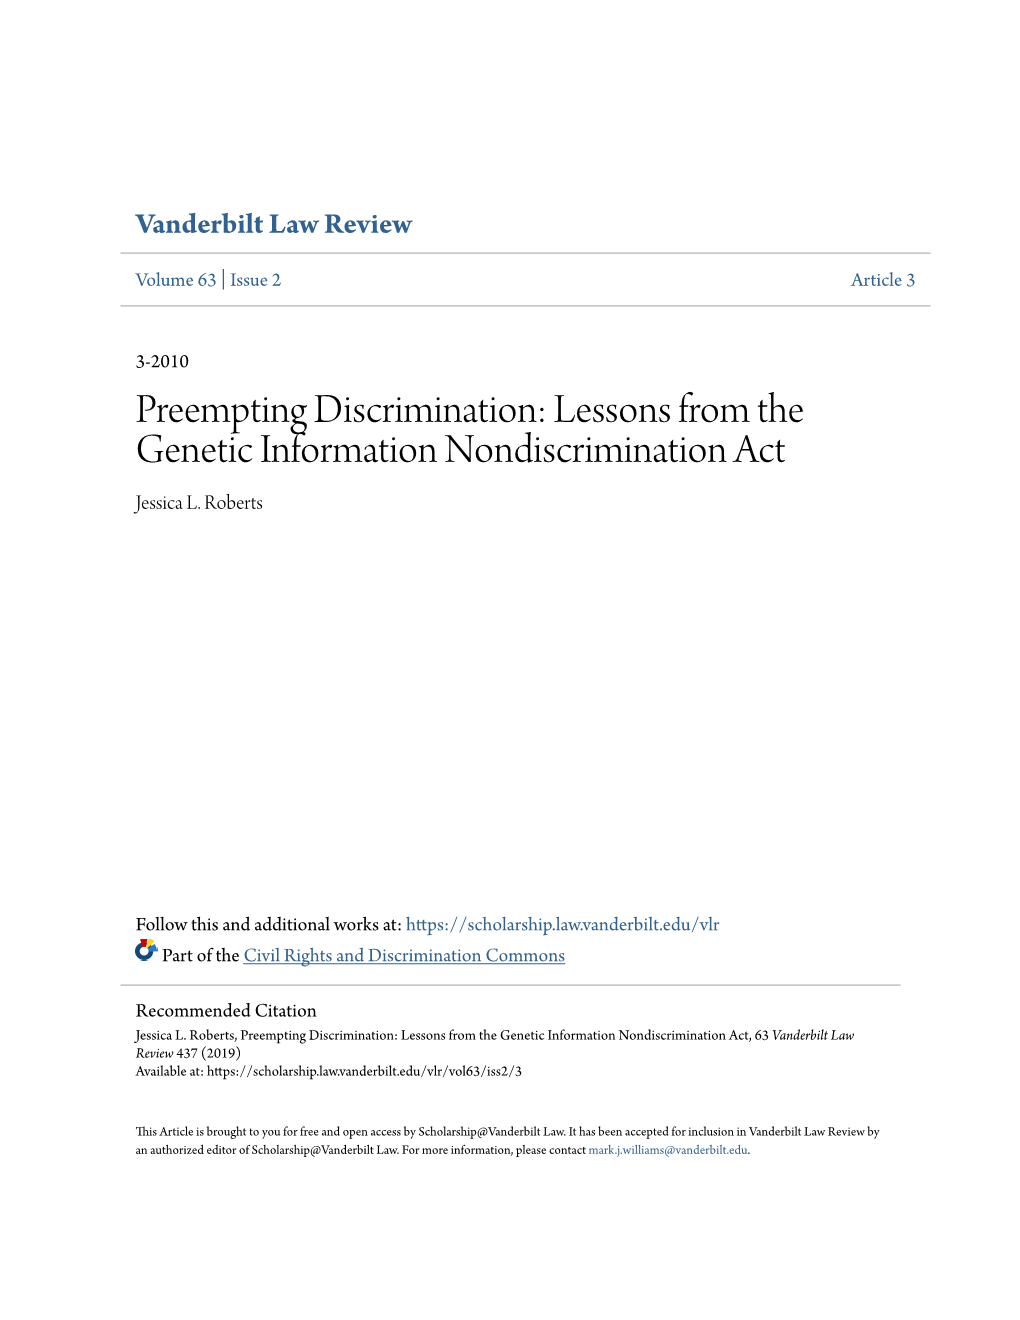 Lessons from the Genetic Information Nondiscrimination Act Jessica L